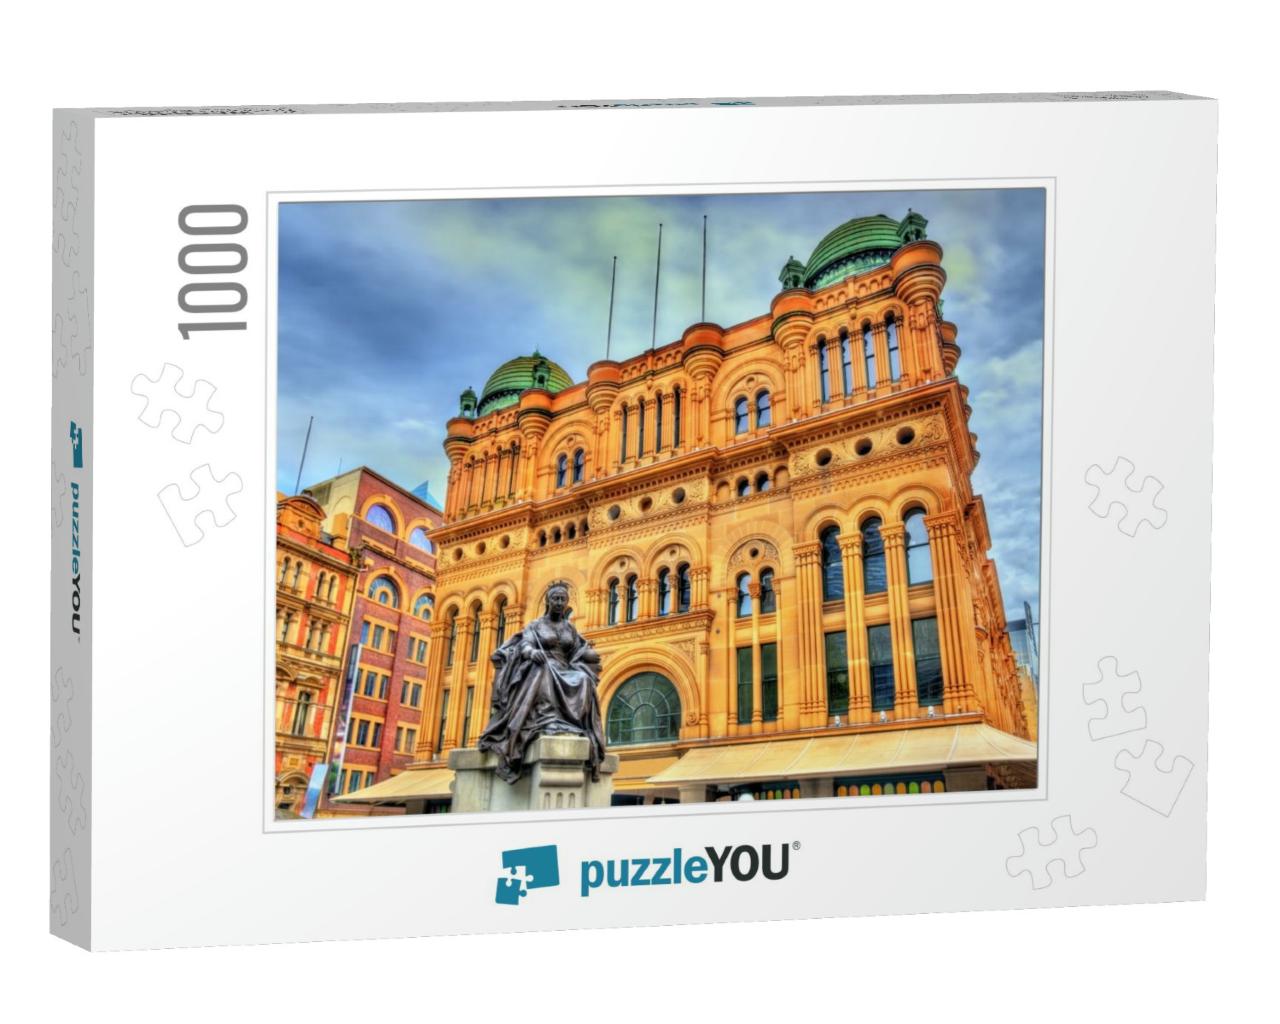 Queen Victoria Building in Sydney, Built in 1898. Austral... Jigsaw Puzzle with 1000 pieces